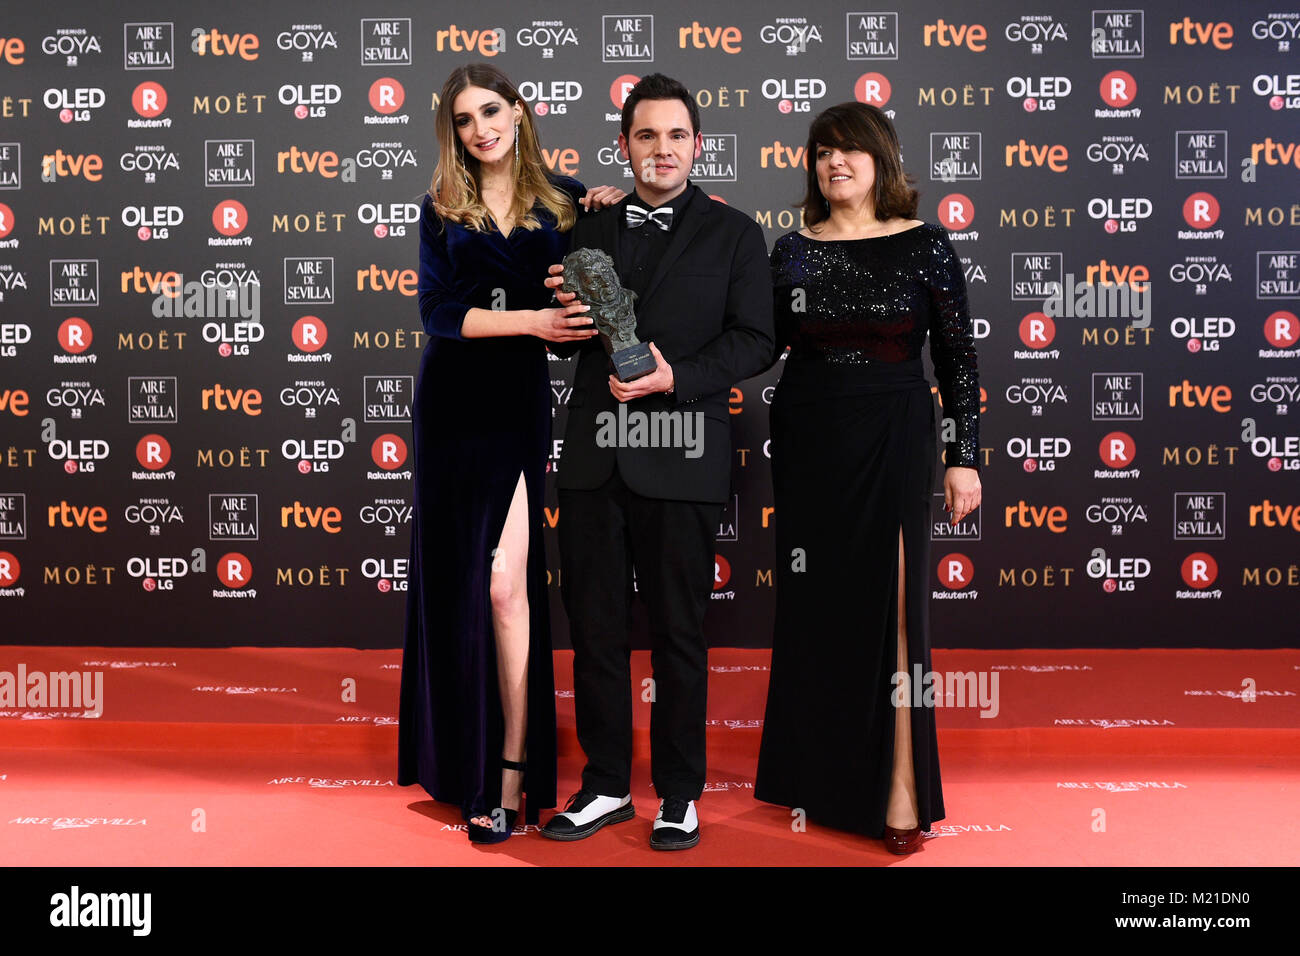 Director Jaume Carrio in the press room during the 32th annual Goya Film Awards in Madrid, on Saturday 3rd February, 2018. pictured: Goya mejor corto animacion ' Woody and Woody ' Credit: Gtres Información más Comuniación on line, S.L./Alamy Live News Stock Photo